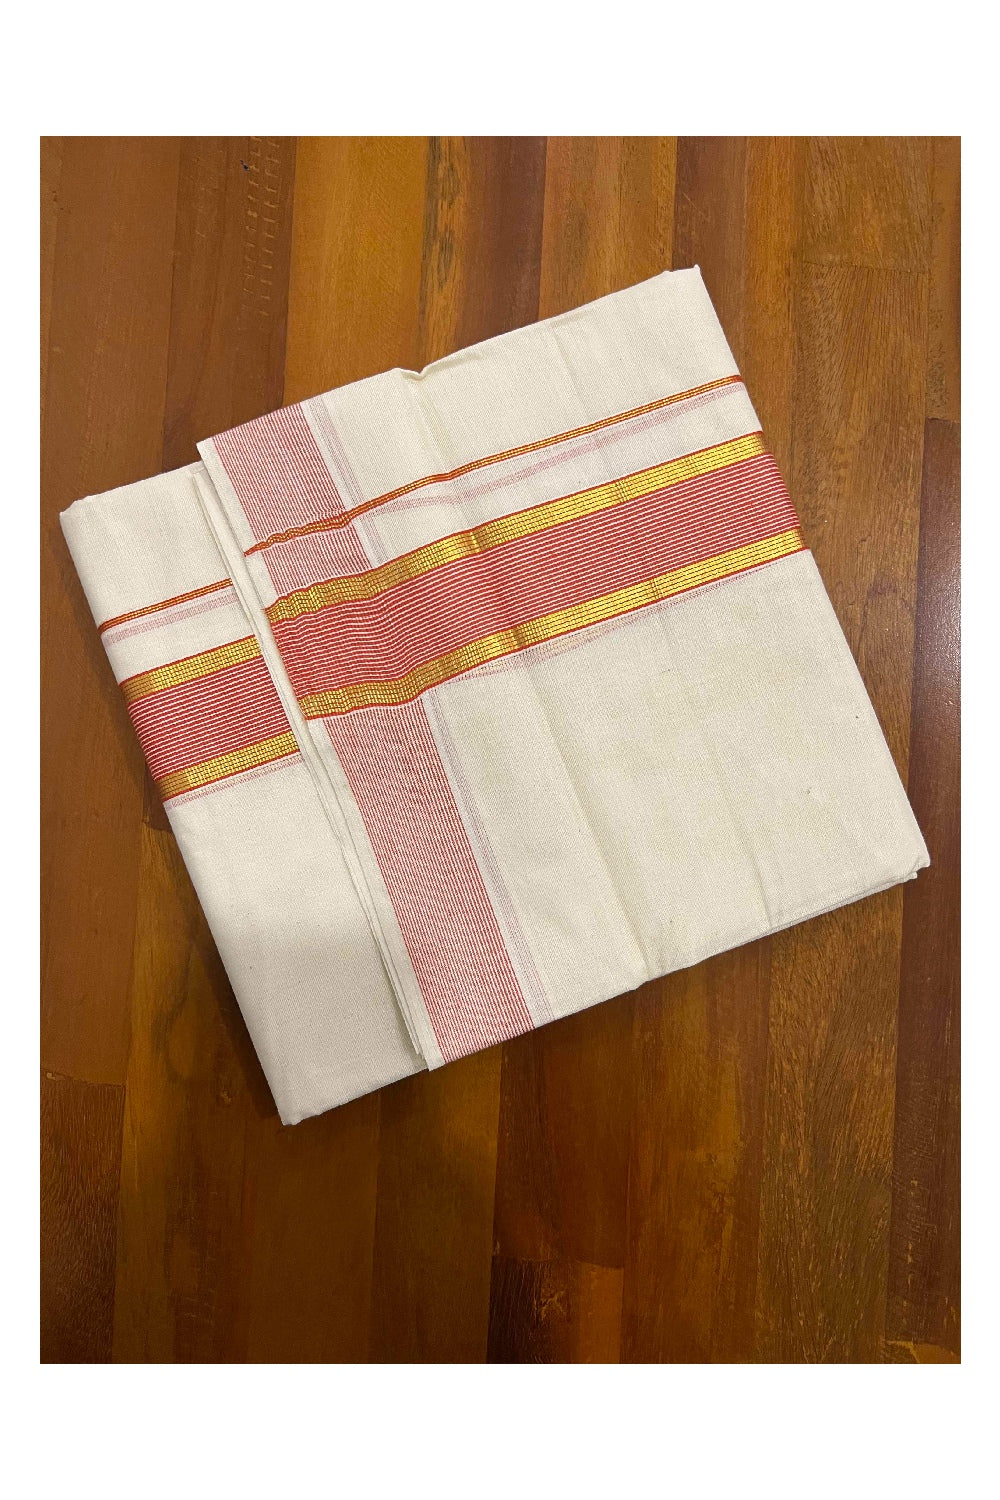 Off White Kerala Double Mundu with Red and Kasavu Border (South Indian Dhoti)